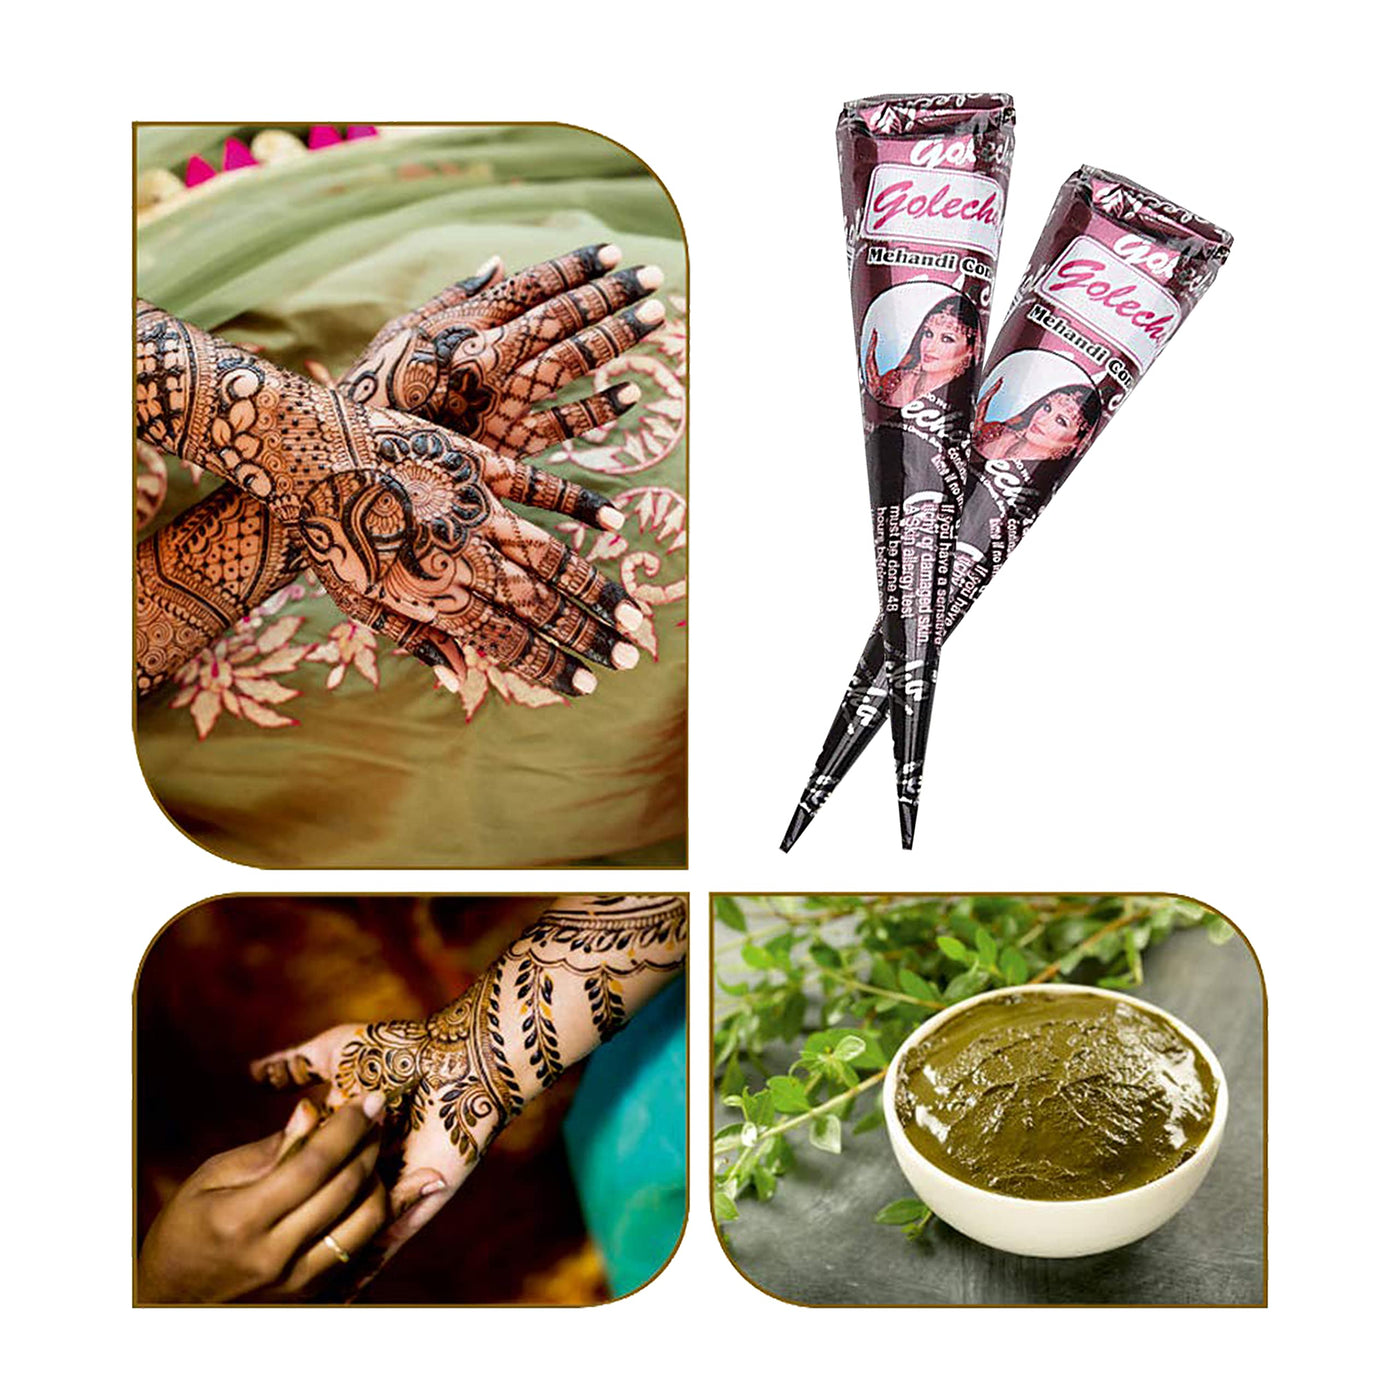  Henna Cones (Pack of 12) 100% Natural Ready to Use Henna Paste  Hair Color Hair Dye Cones : Beauty & Personal Care